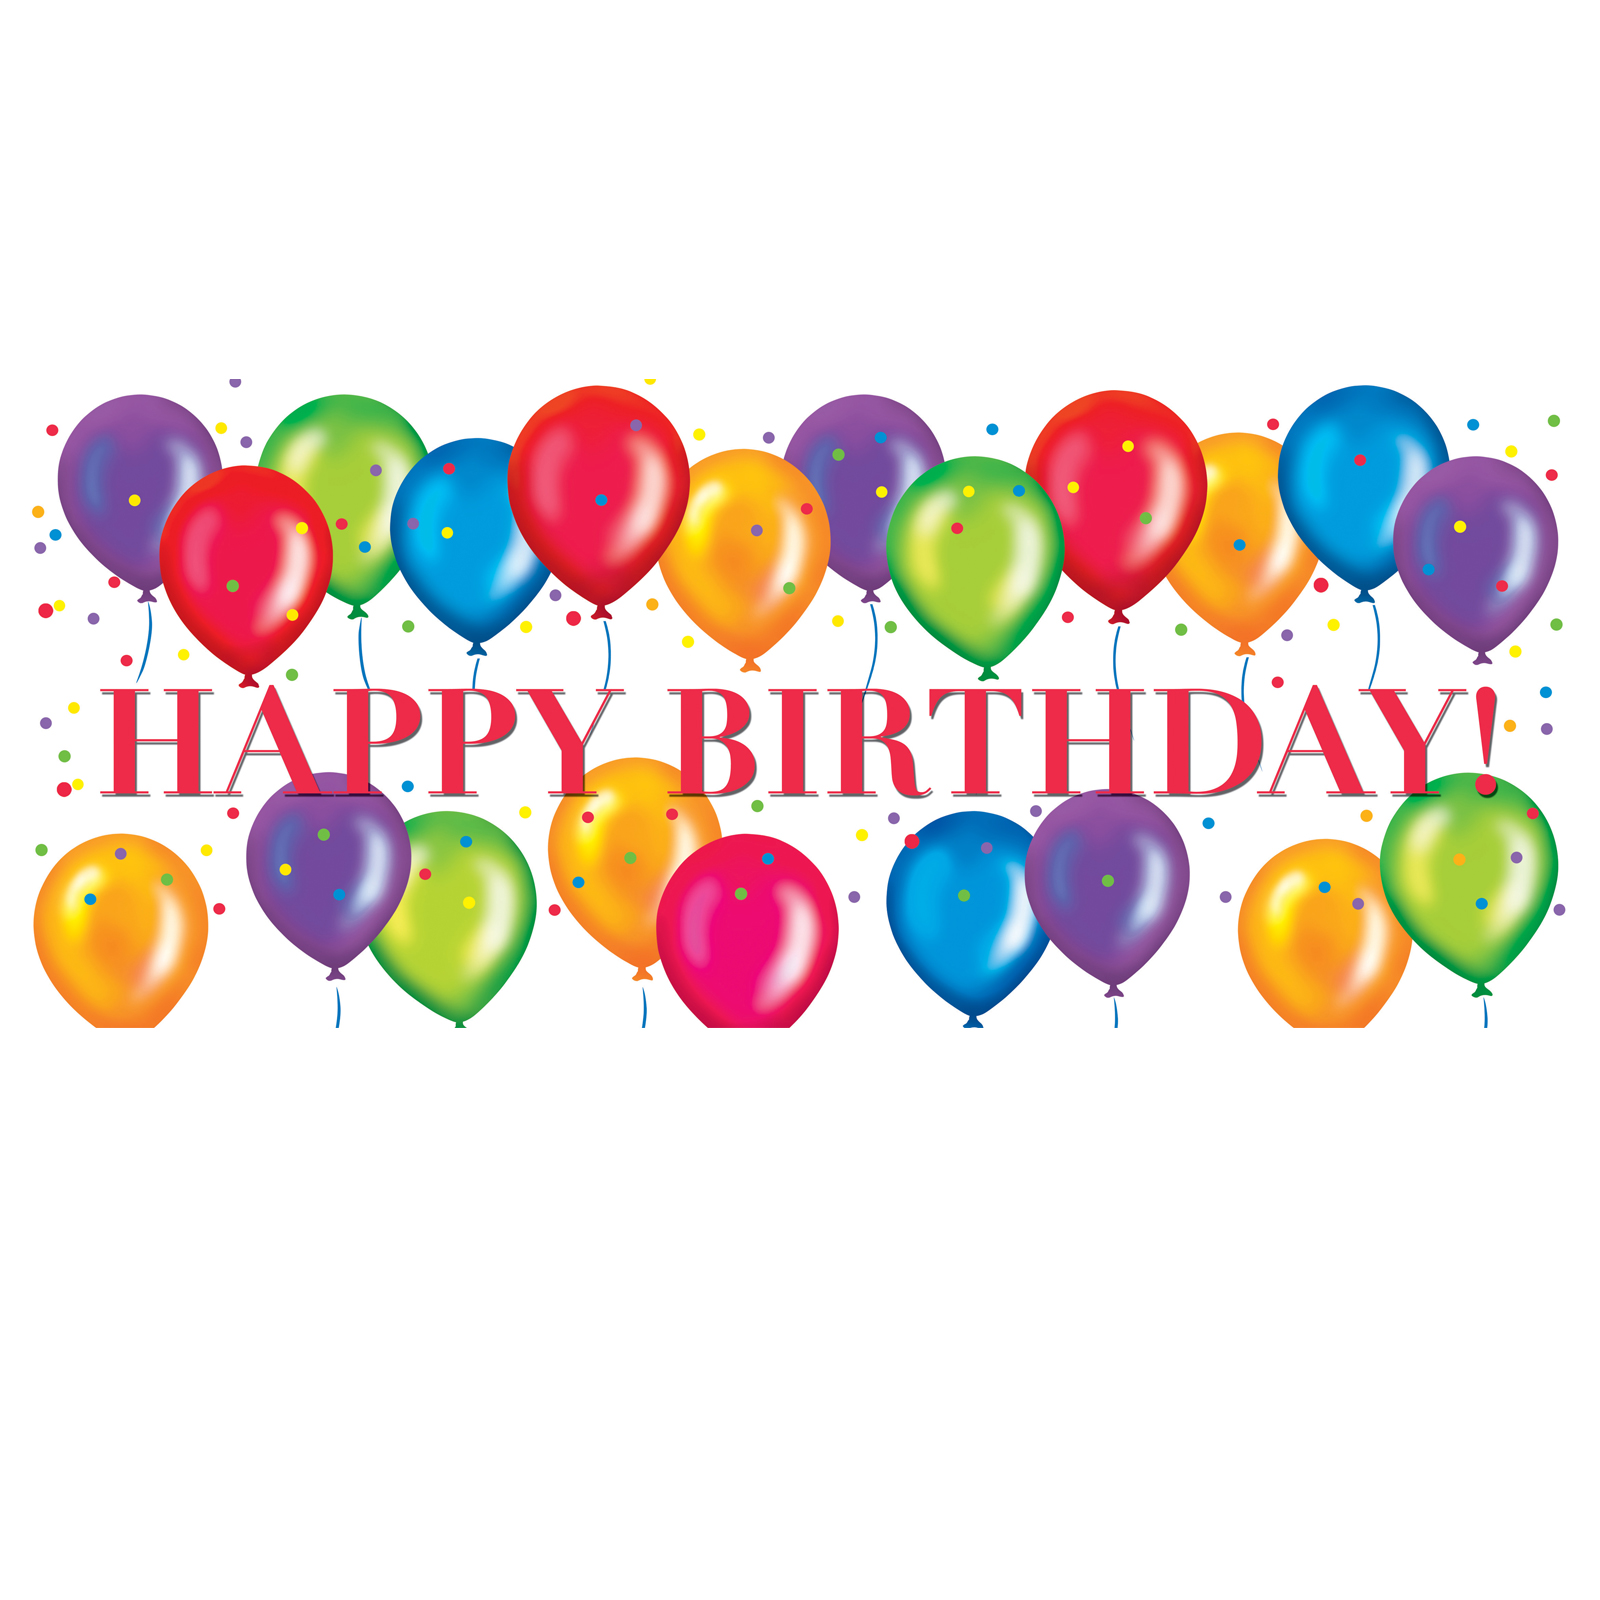 Free clipart birthday balloons clipartfest